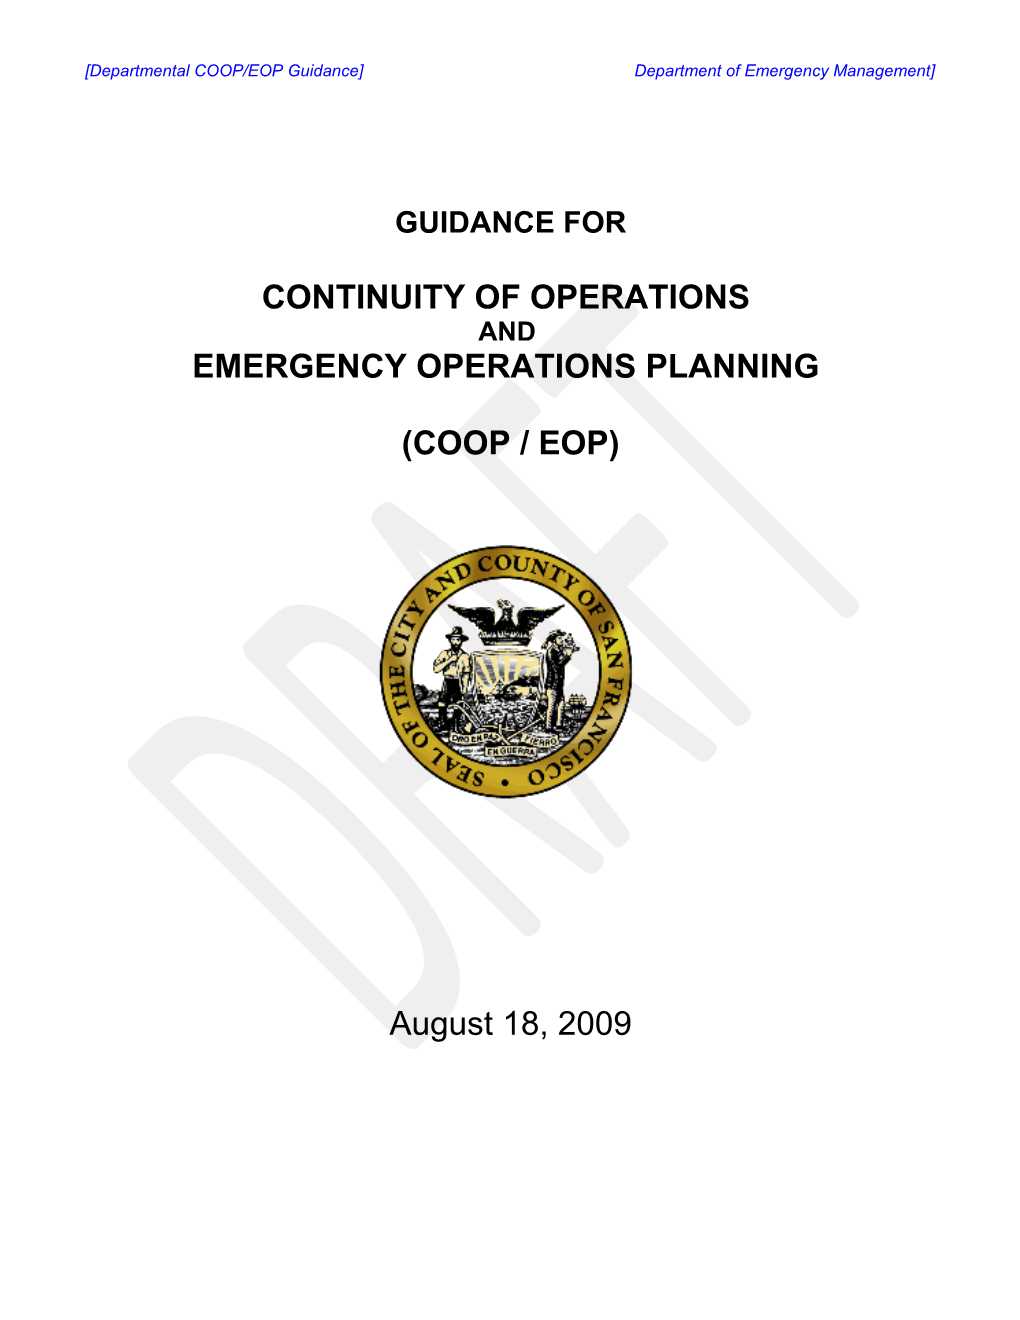 Continuity of Operations and Emergency Operations Planning